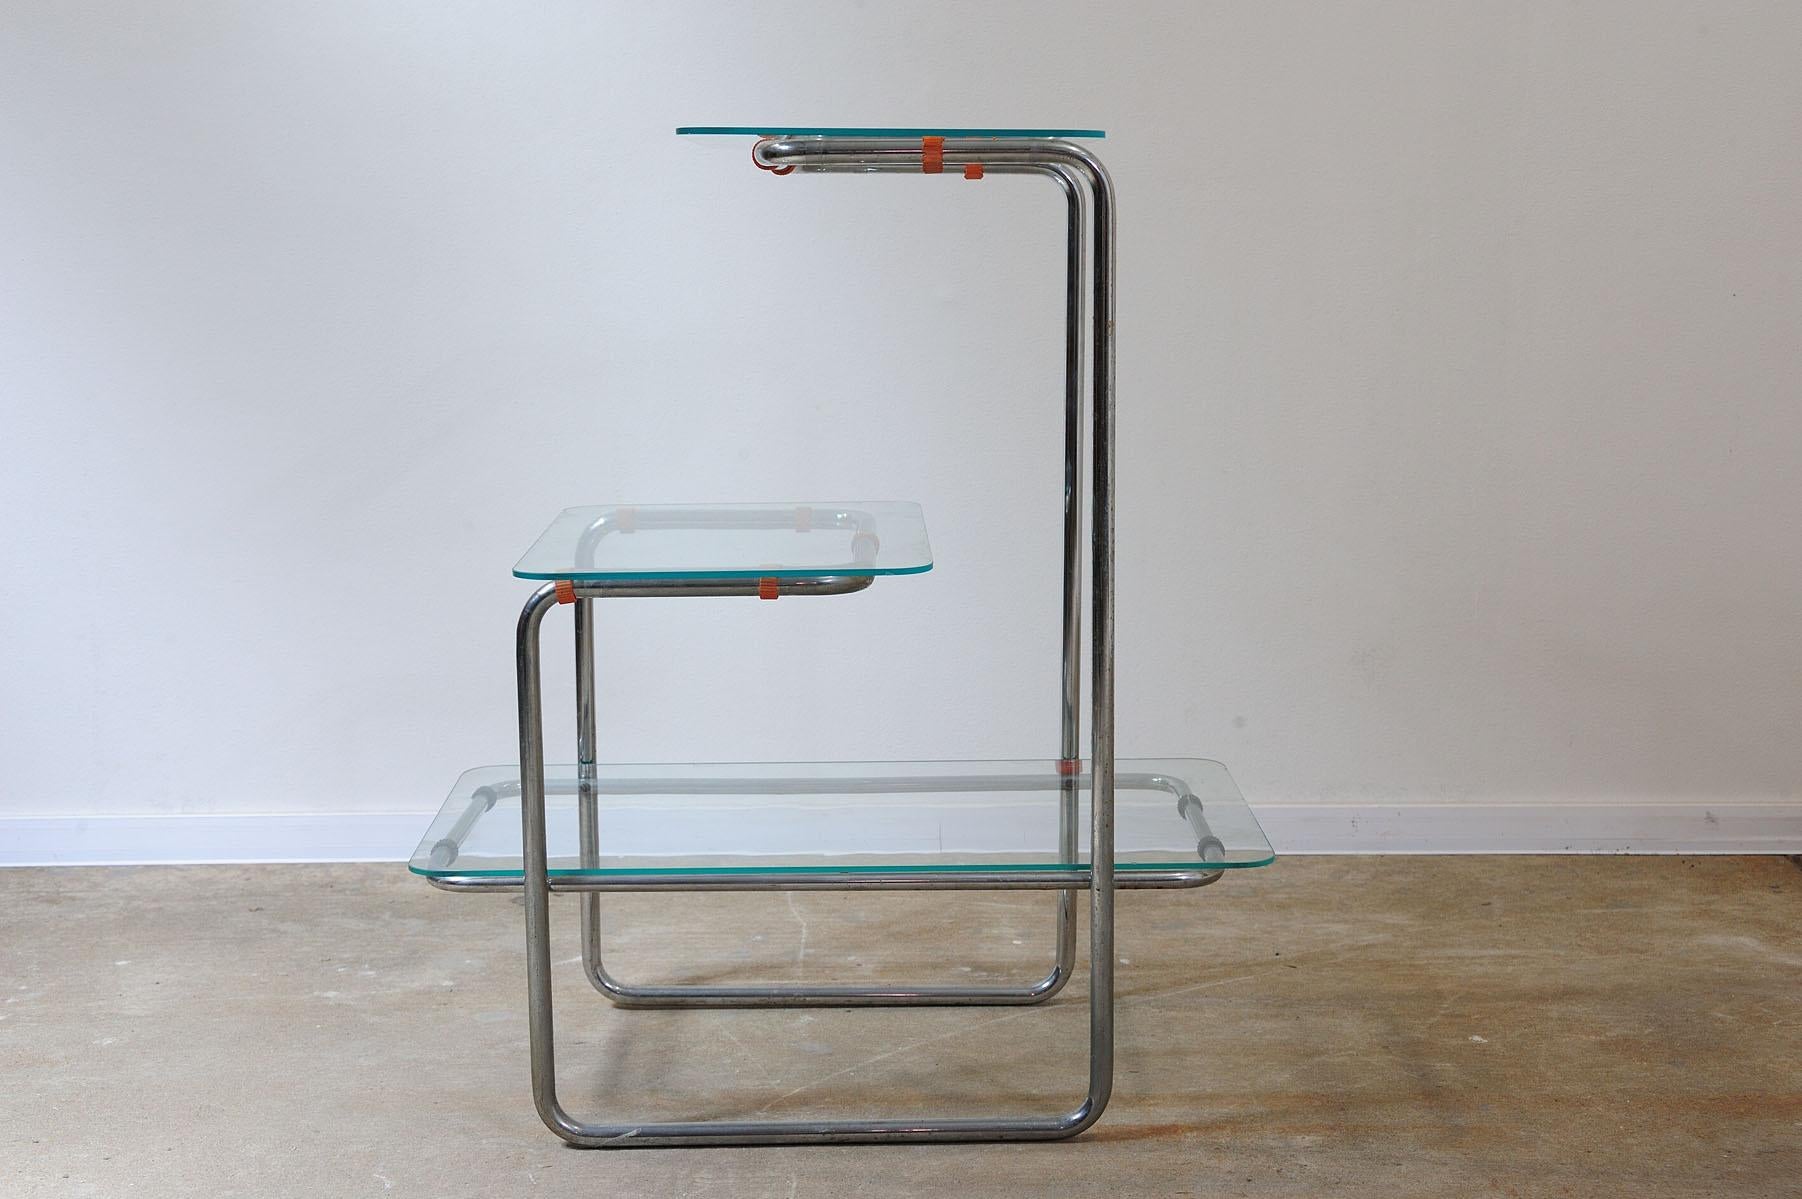 This functionalist vintage flower stand was designed by arch. Emile Guyot and made by Thonet in Central Europe in the 1930´s. It features an original chromed tubular steel tructure and and three glass pedestals for flowers

In very good